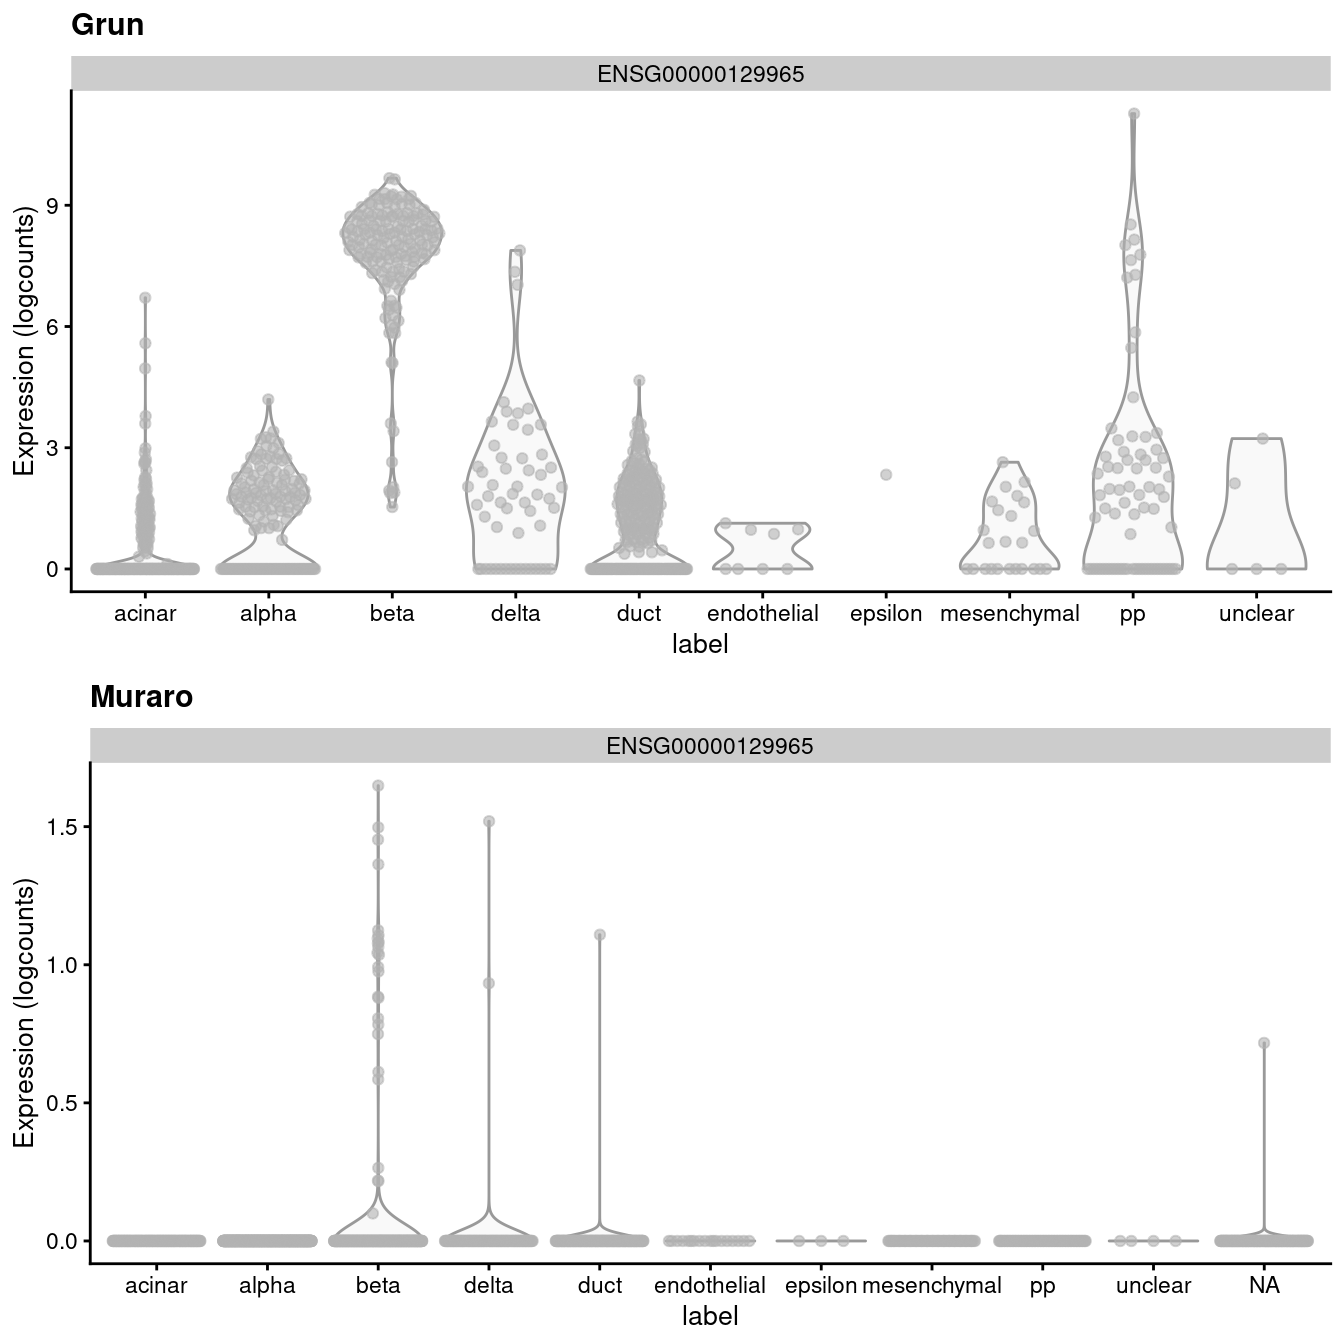 Distribution of uncorrected expression values for _INS-IGF2_ across the cell types in the Grun and Muraro pancreas datasets.